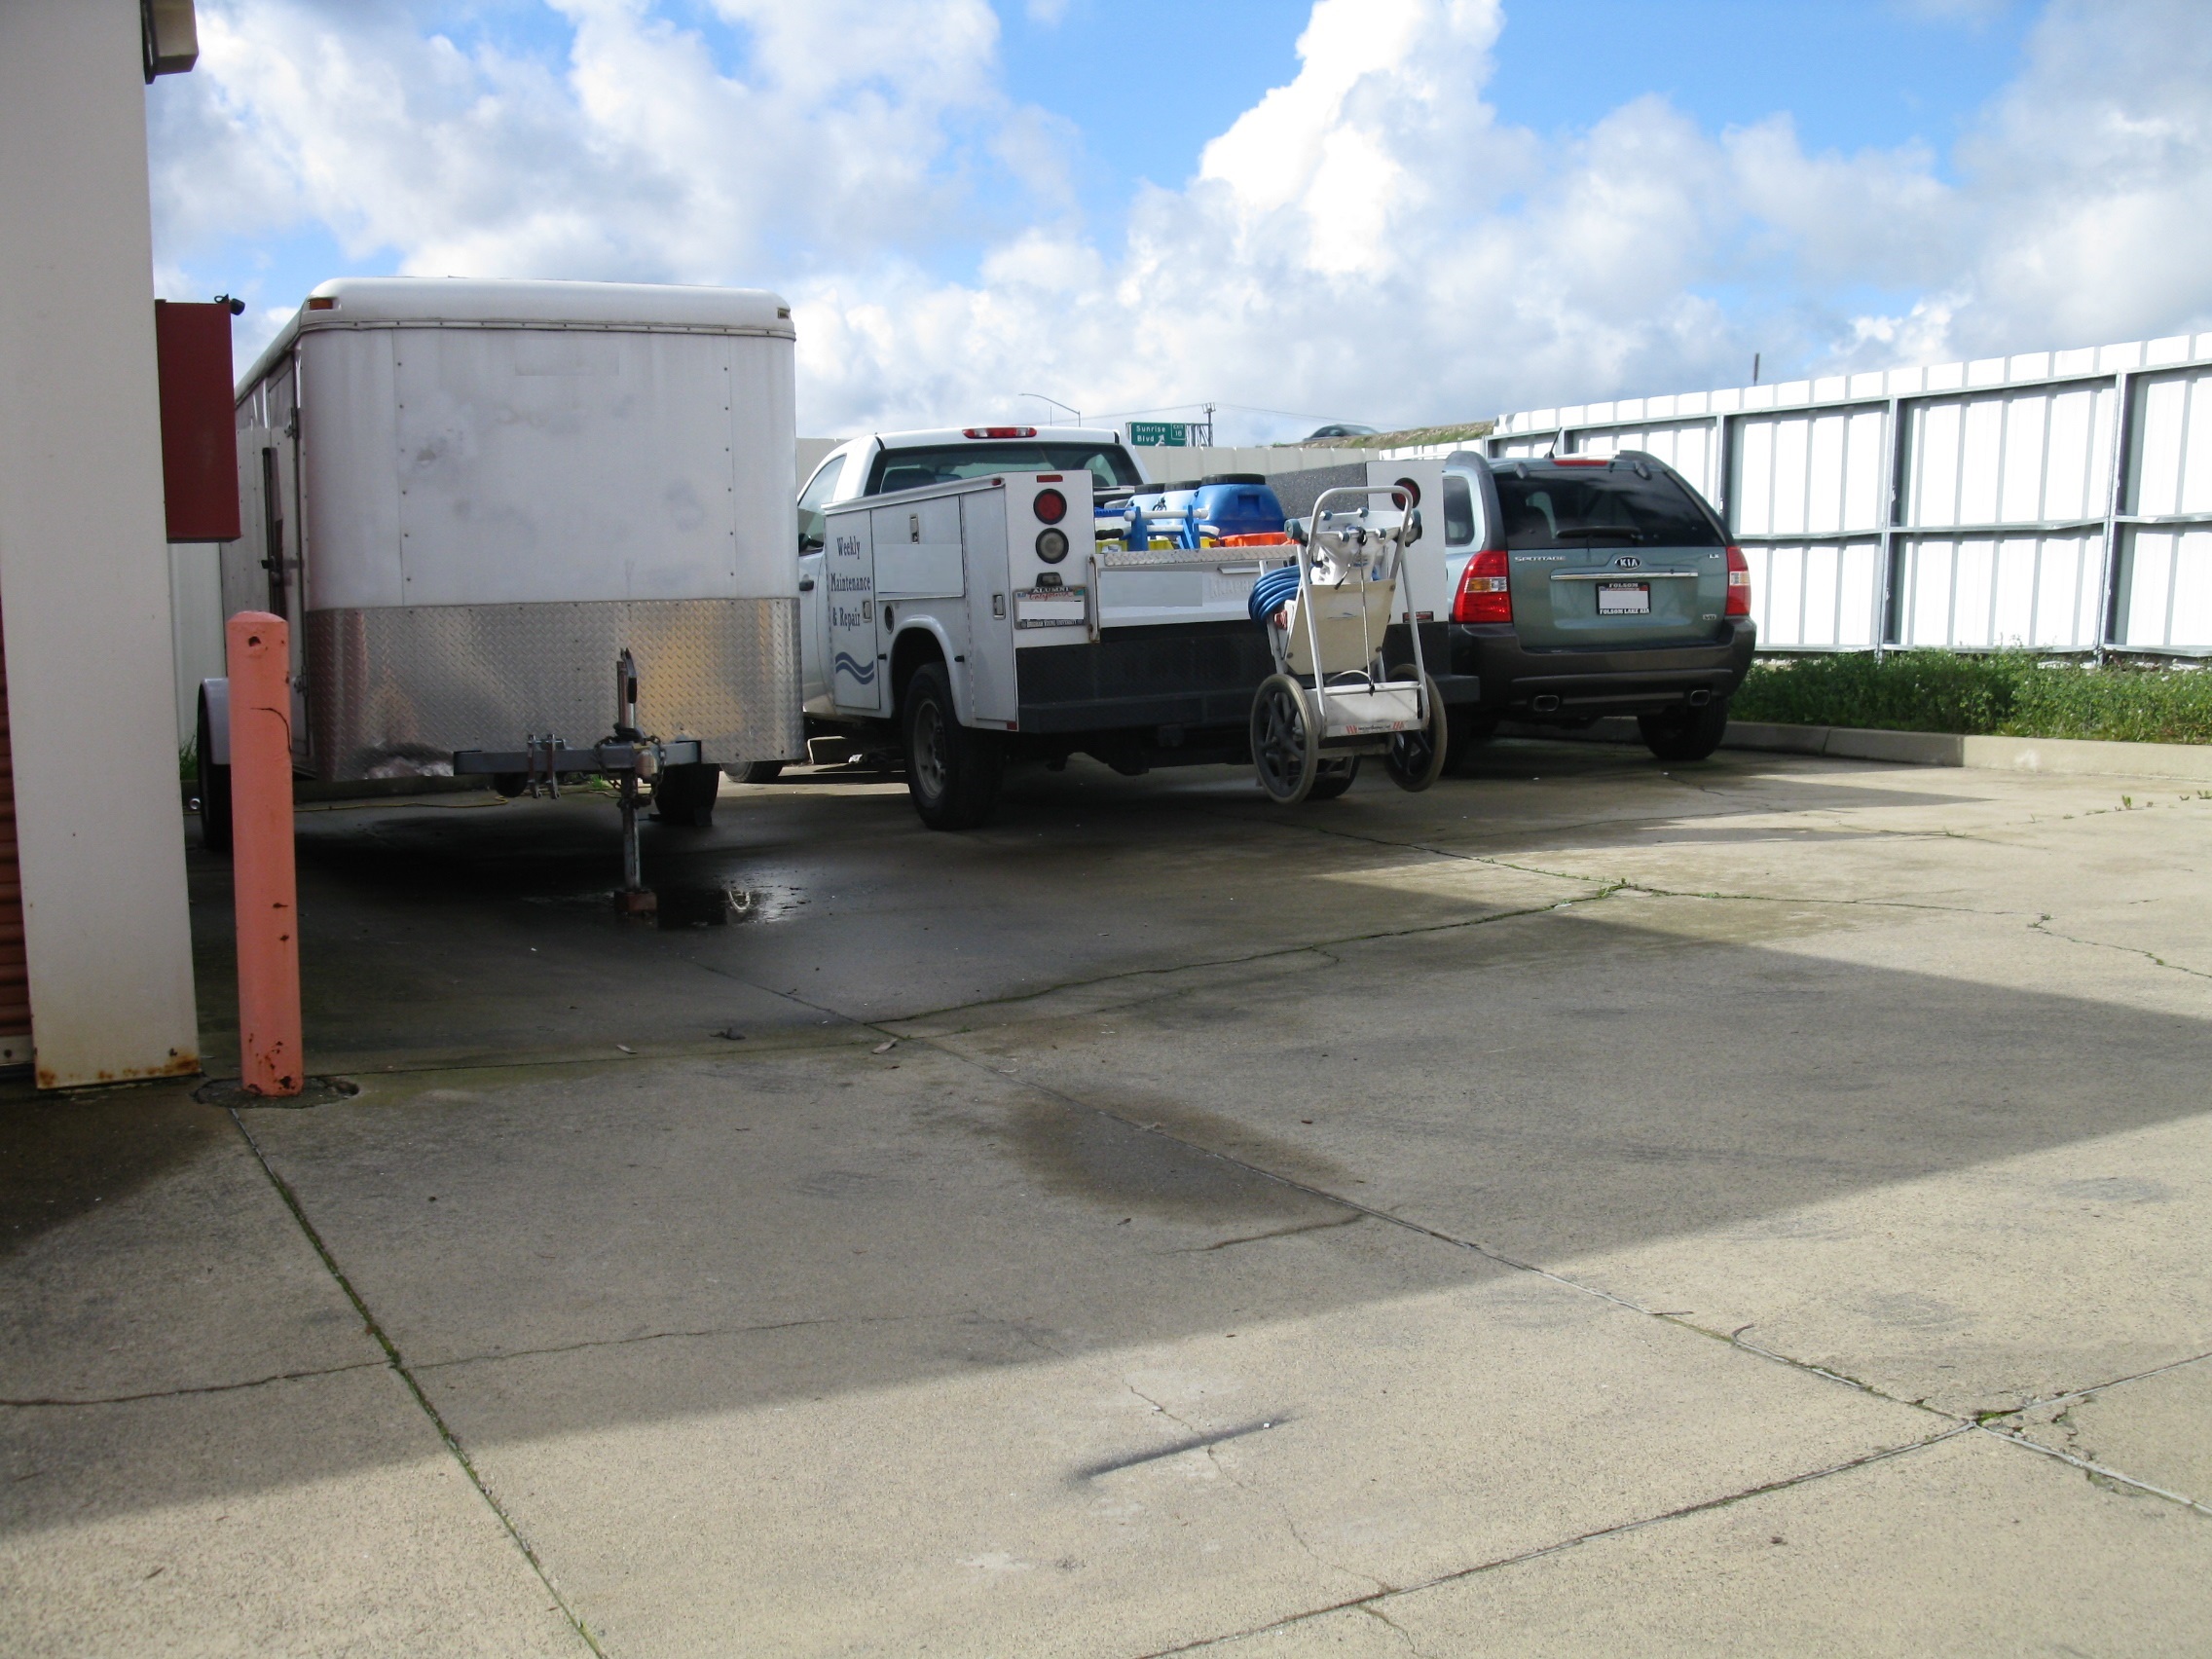 Sentry Storage on Folsom Blvd has outdoor parking to store vehicles, trailers, and boats